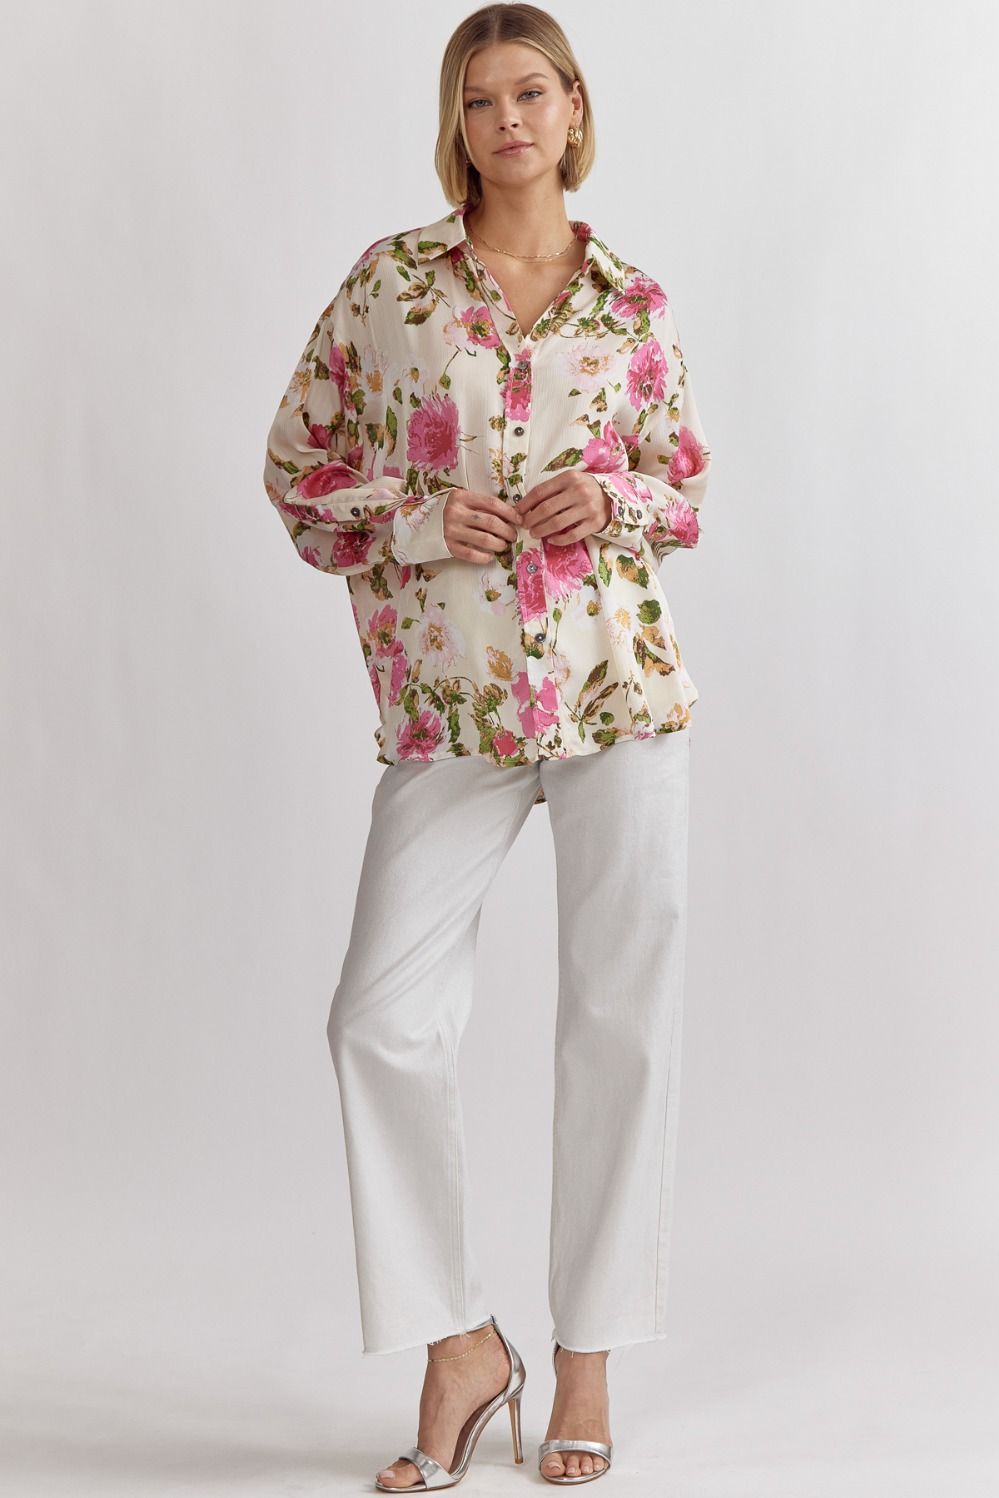 "Count On Flowers" Blouse (Vanilla) - Happily Ever Aften